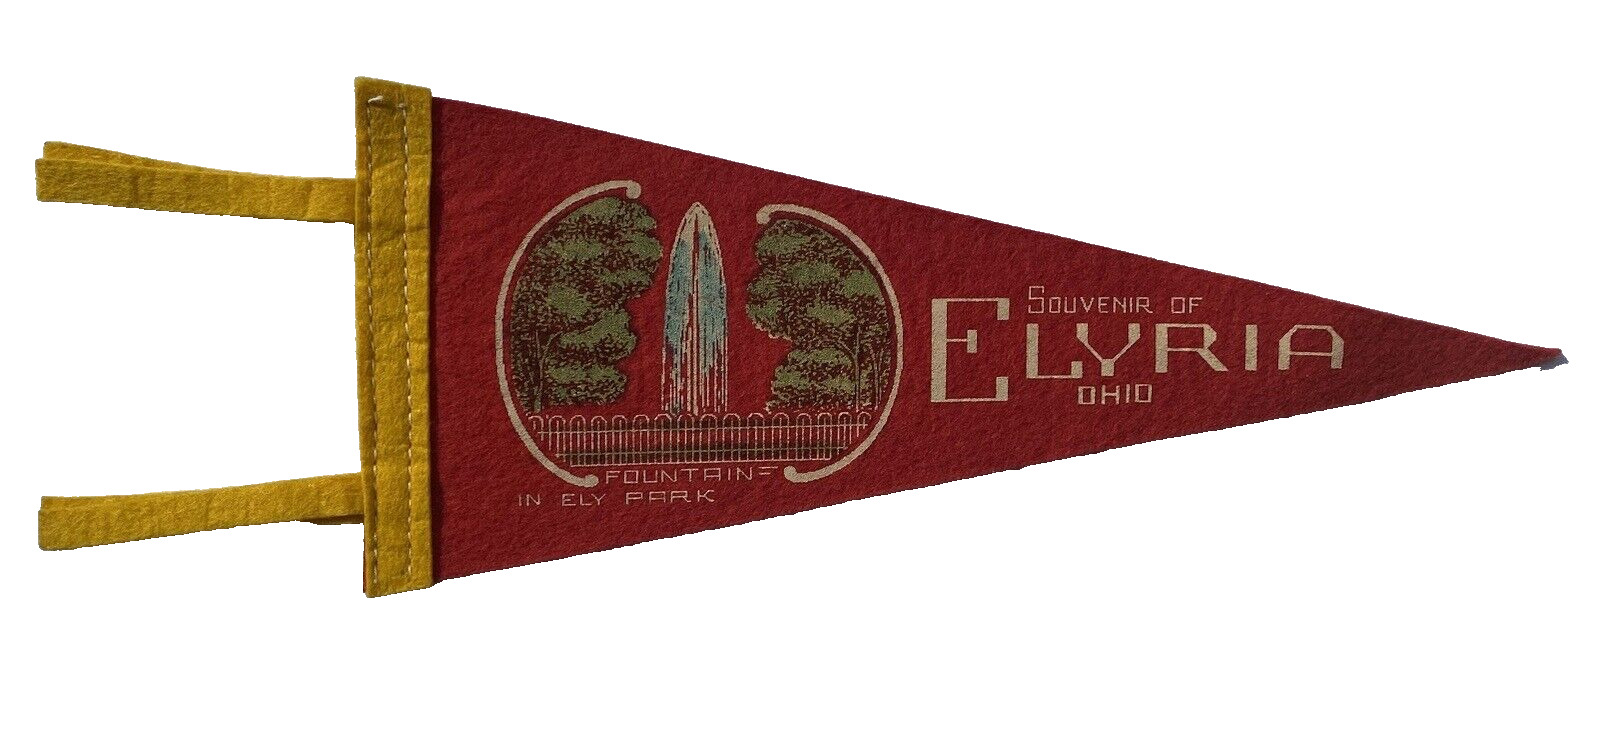 Vintage 1940\'s Elyria Ohio Mini Pennant Fountain in Ely Park Graphic Early Old